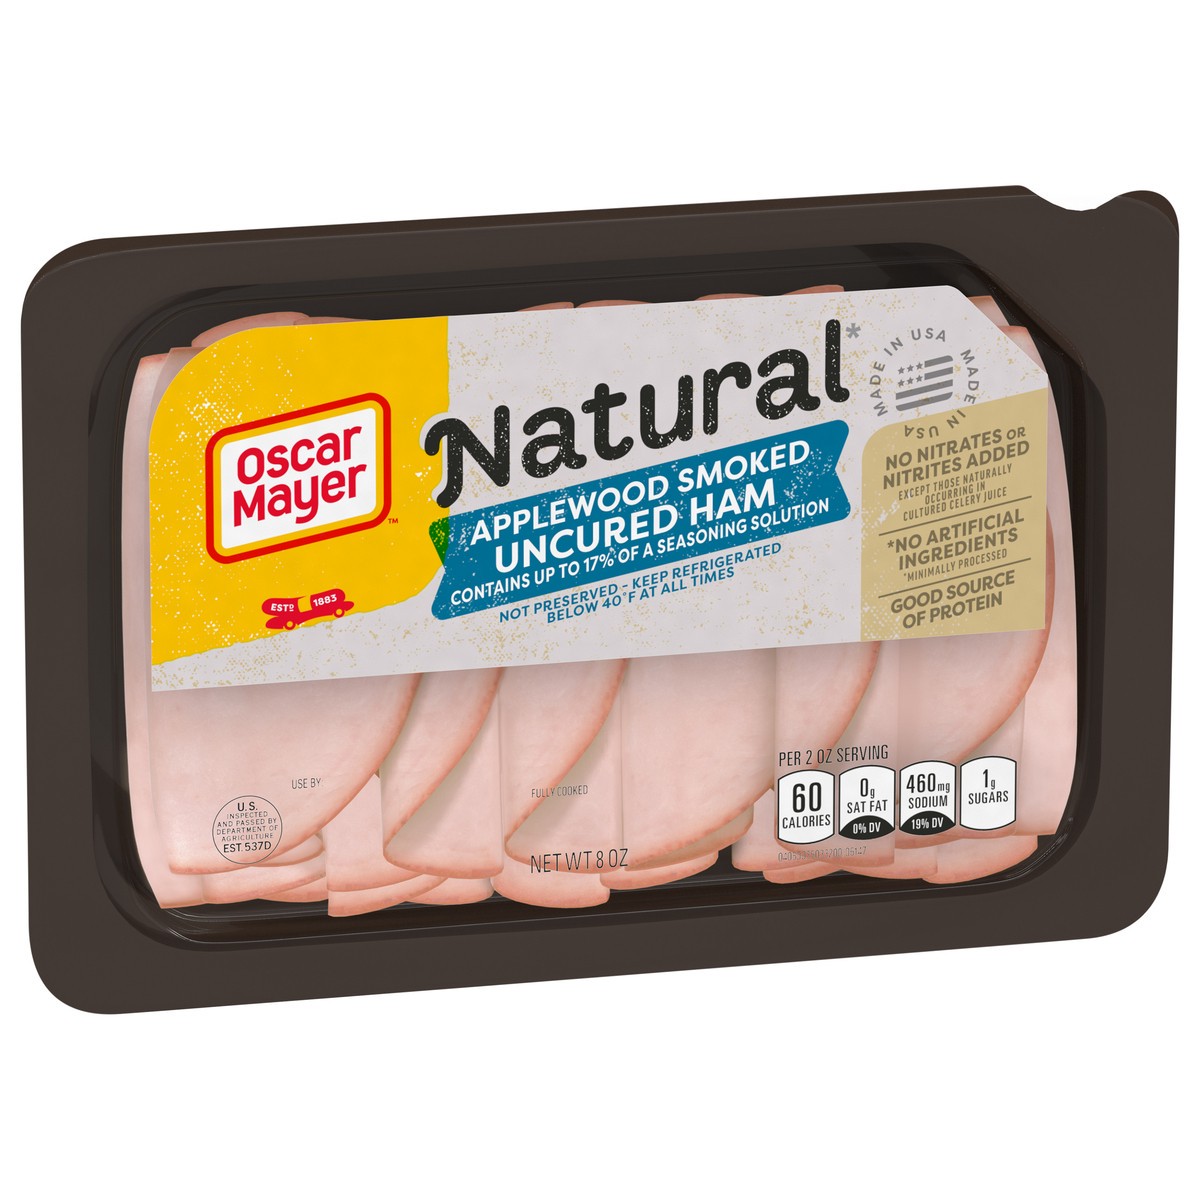 slide 2 of 13, Oscar Mayer Natural Applewood Smoked Uncured Ham Sliced Lunch Meat, 8 oz. Tray, 8 oz